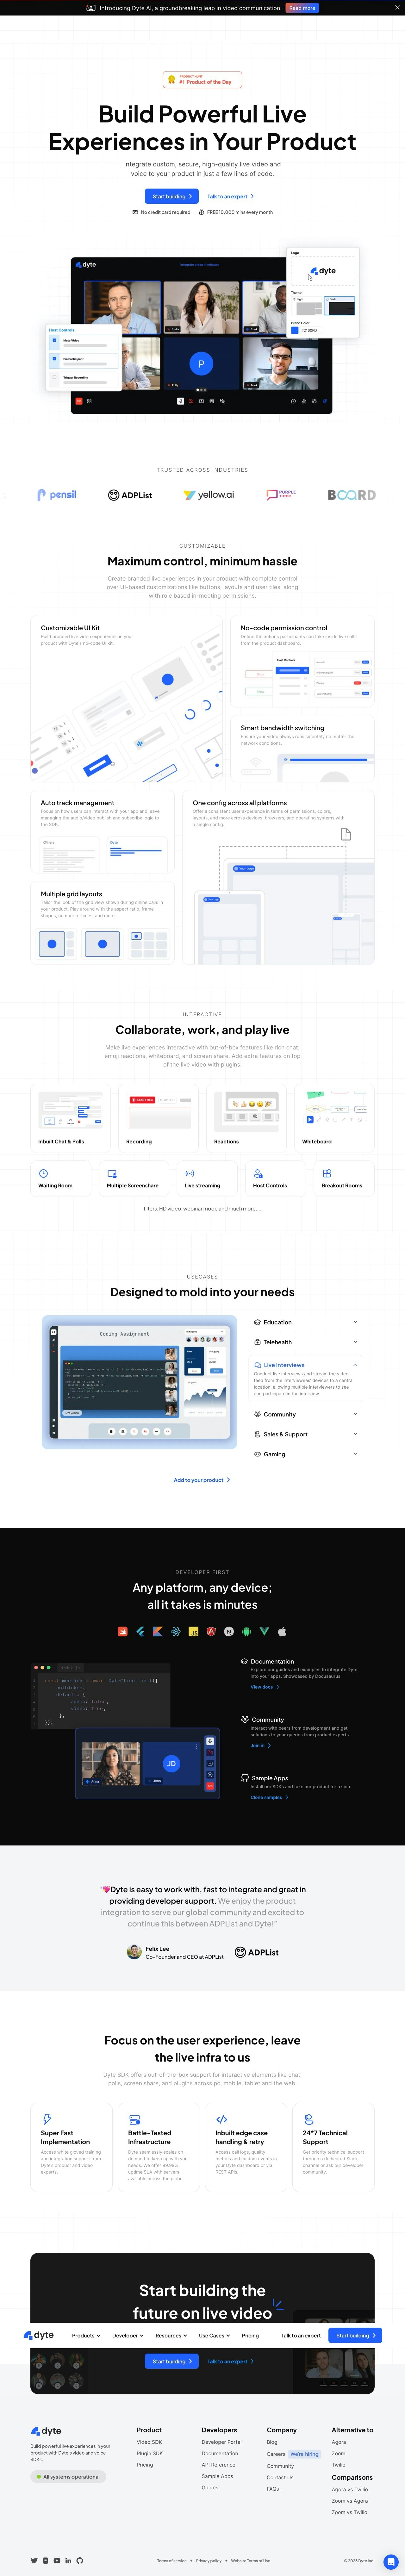 Live Video SDK by Dyte landing page design